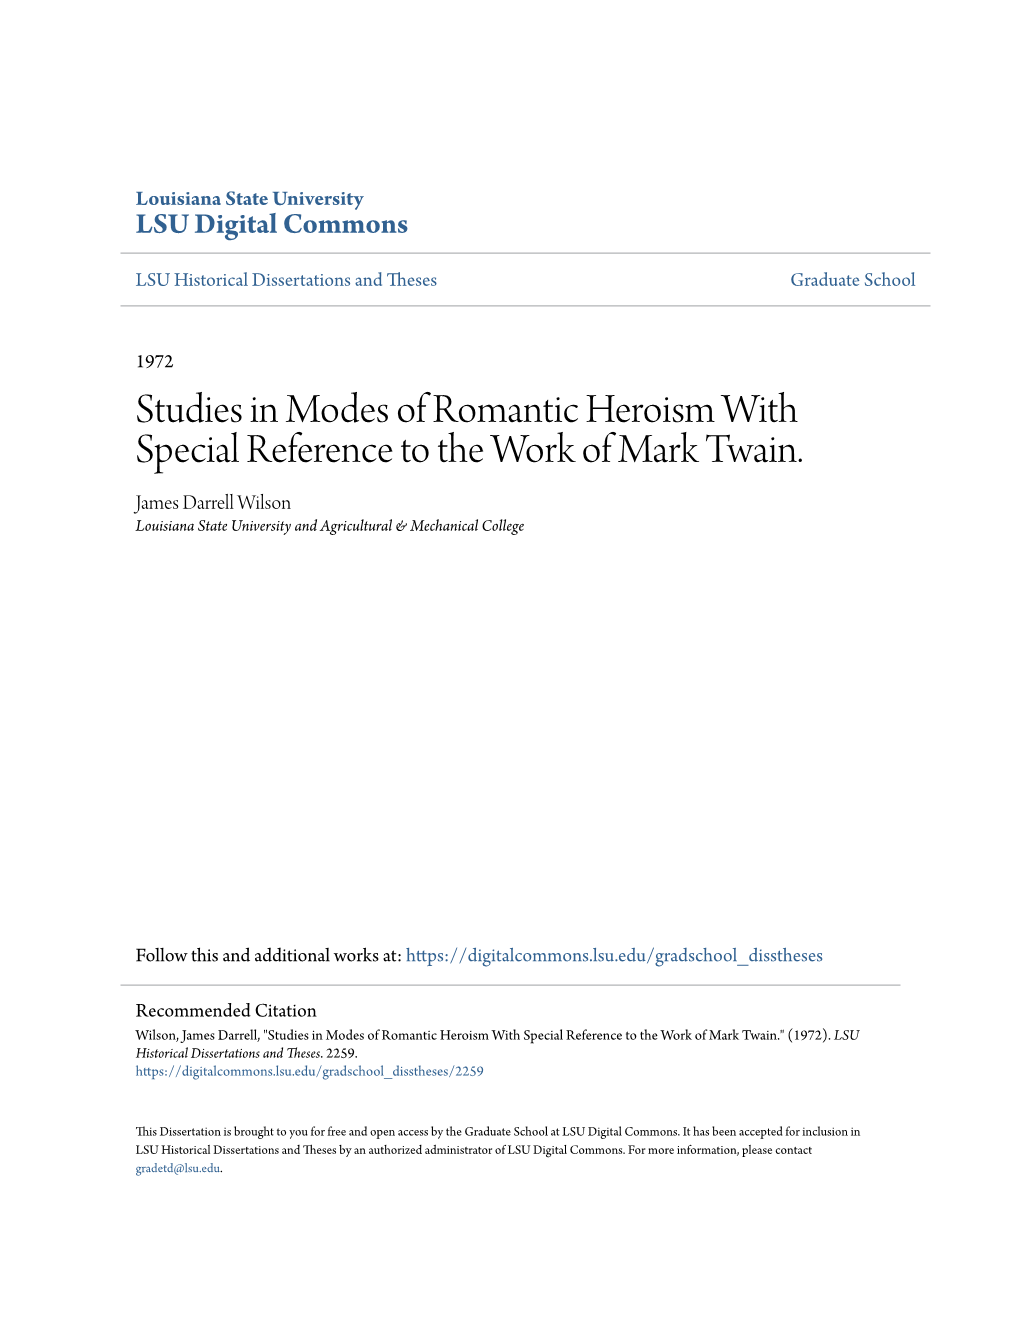 Studies in Modes of Romantic Heroism with Special Reference to the Work of Mark Twain